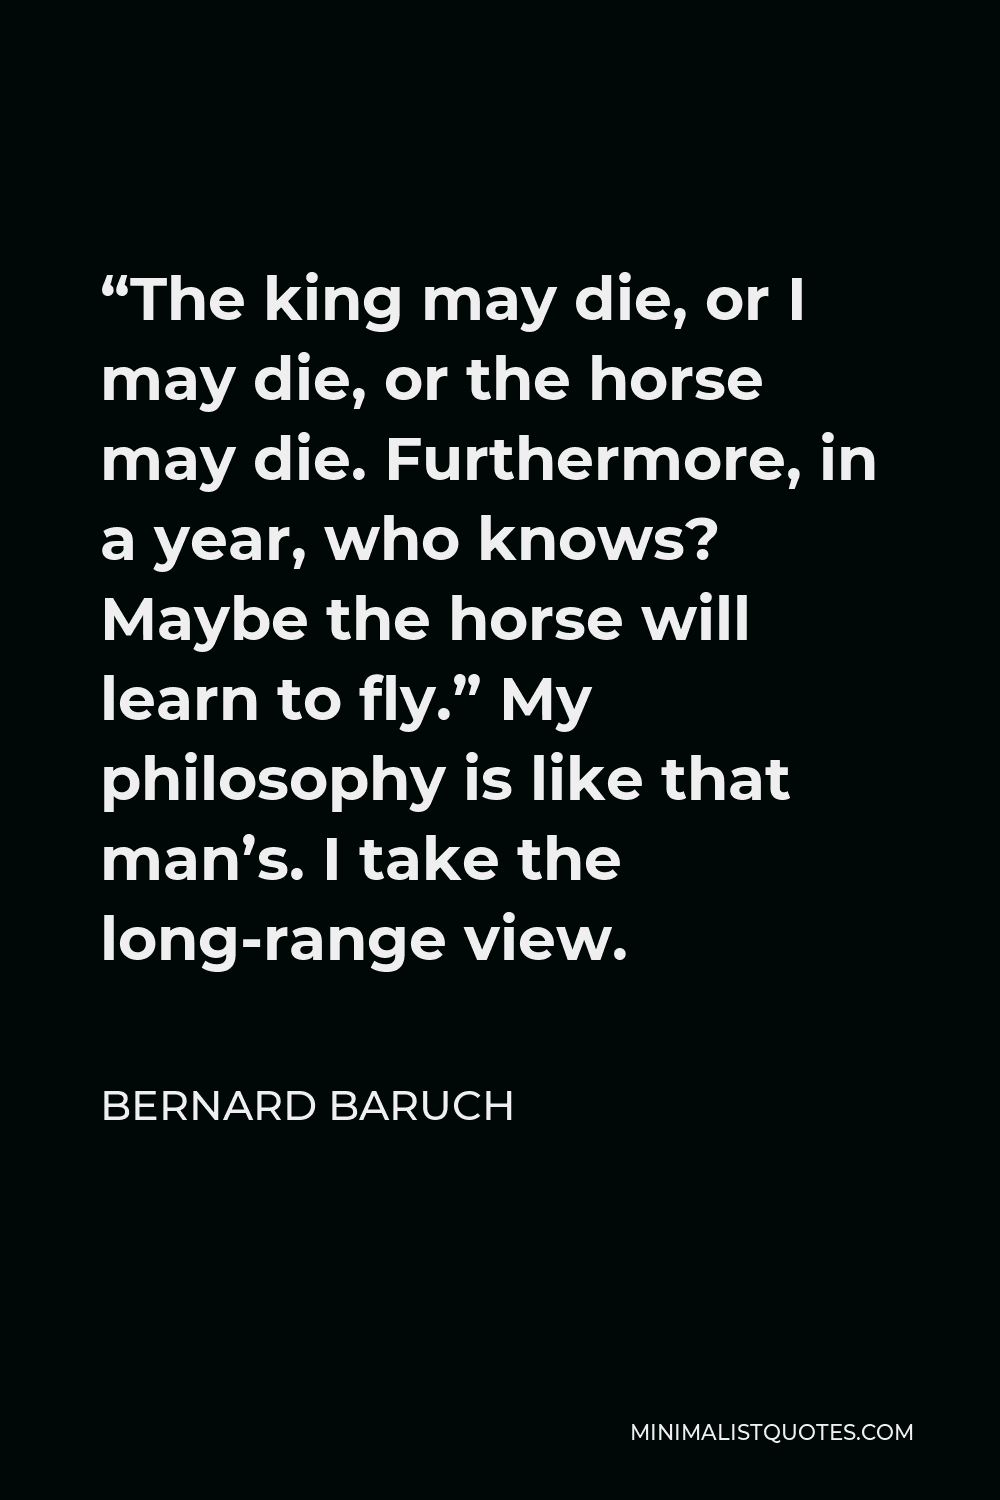 Bernard Baruch Quote - “The king may die, or I may die, or the horse may die. Furthermore, in a year, who knows? Maybe the horse will learn to fly.” My philosophy is like that man’s. I take the long-range view.